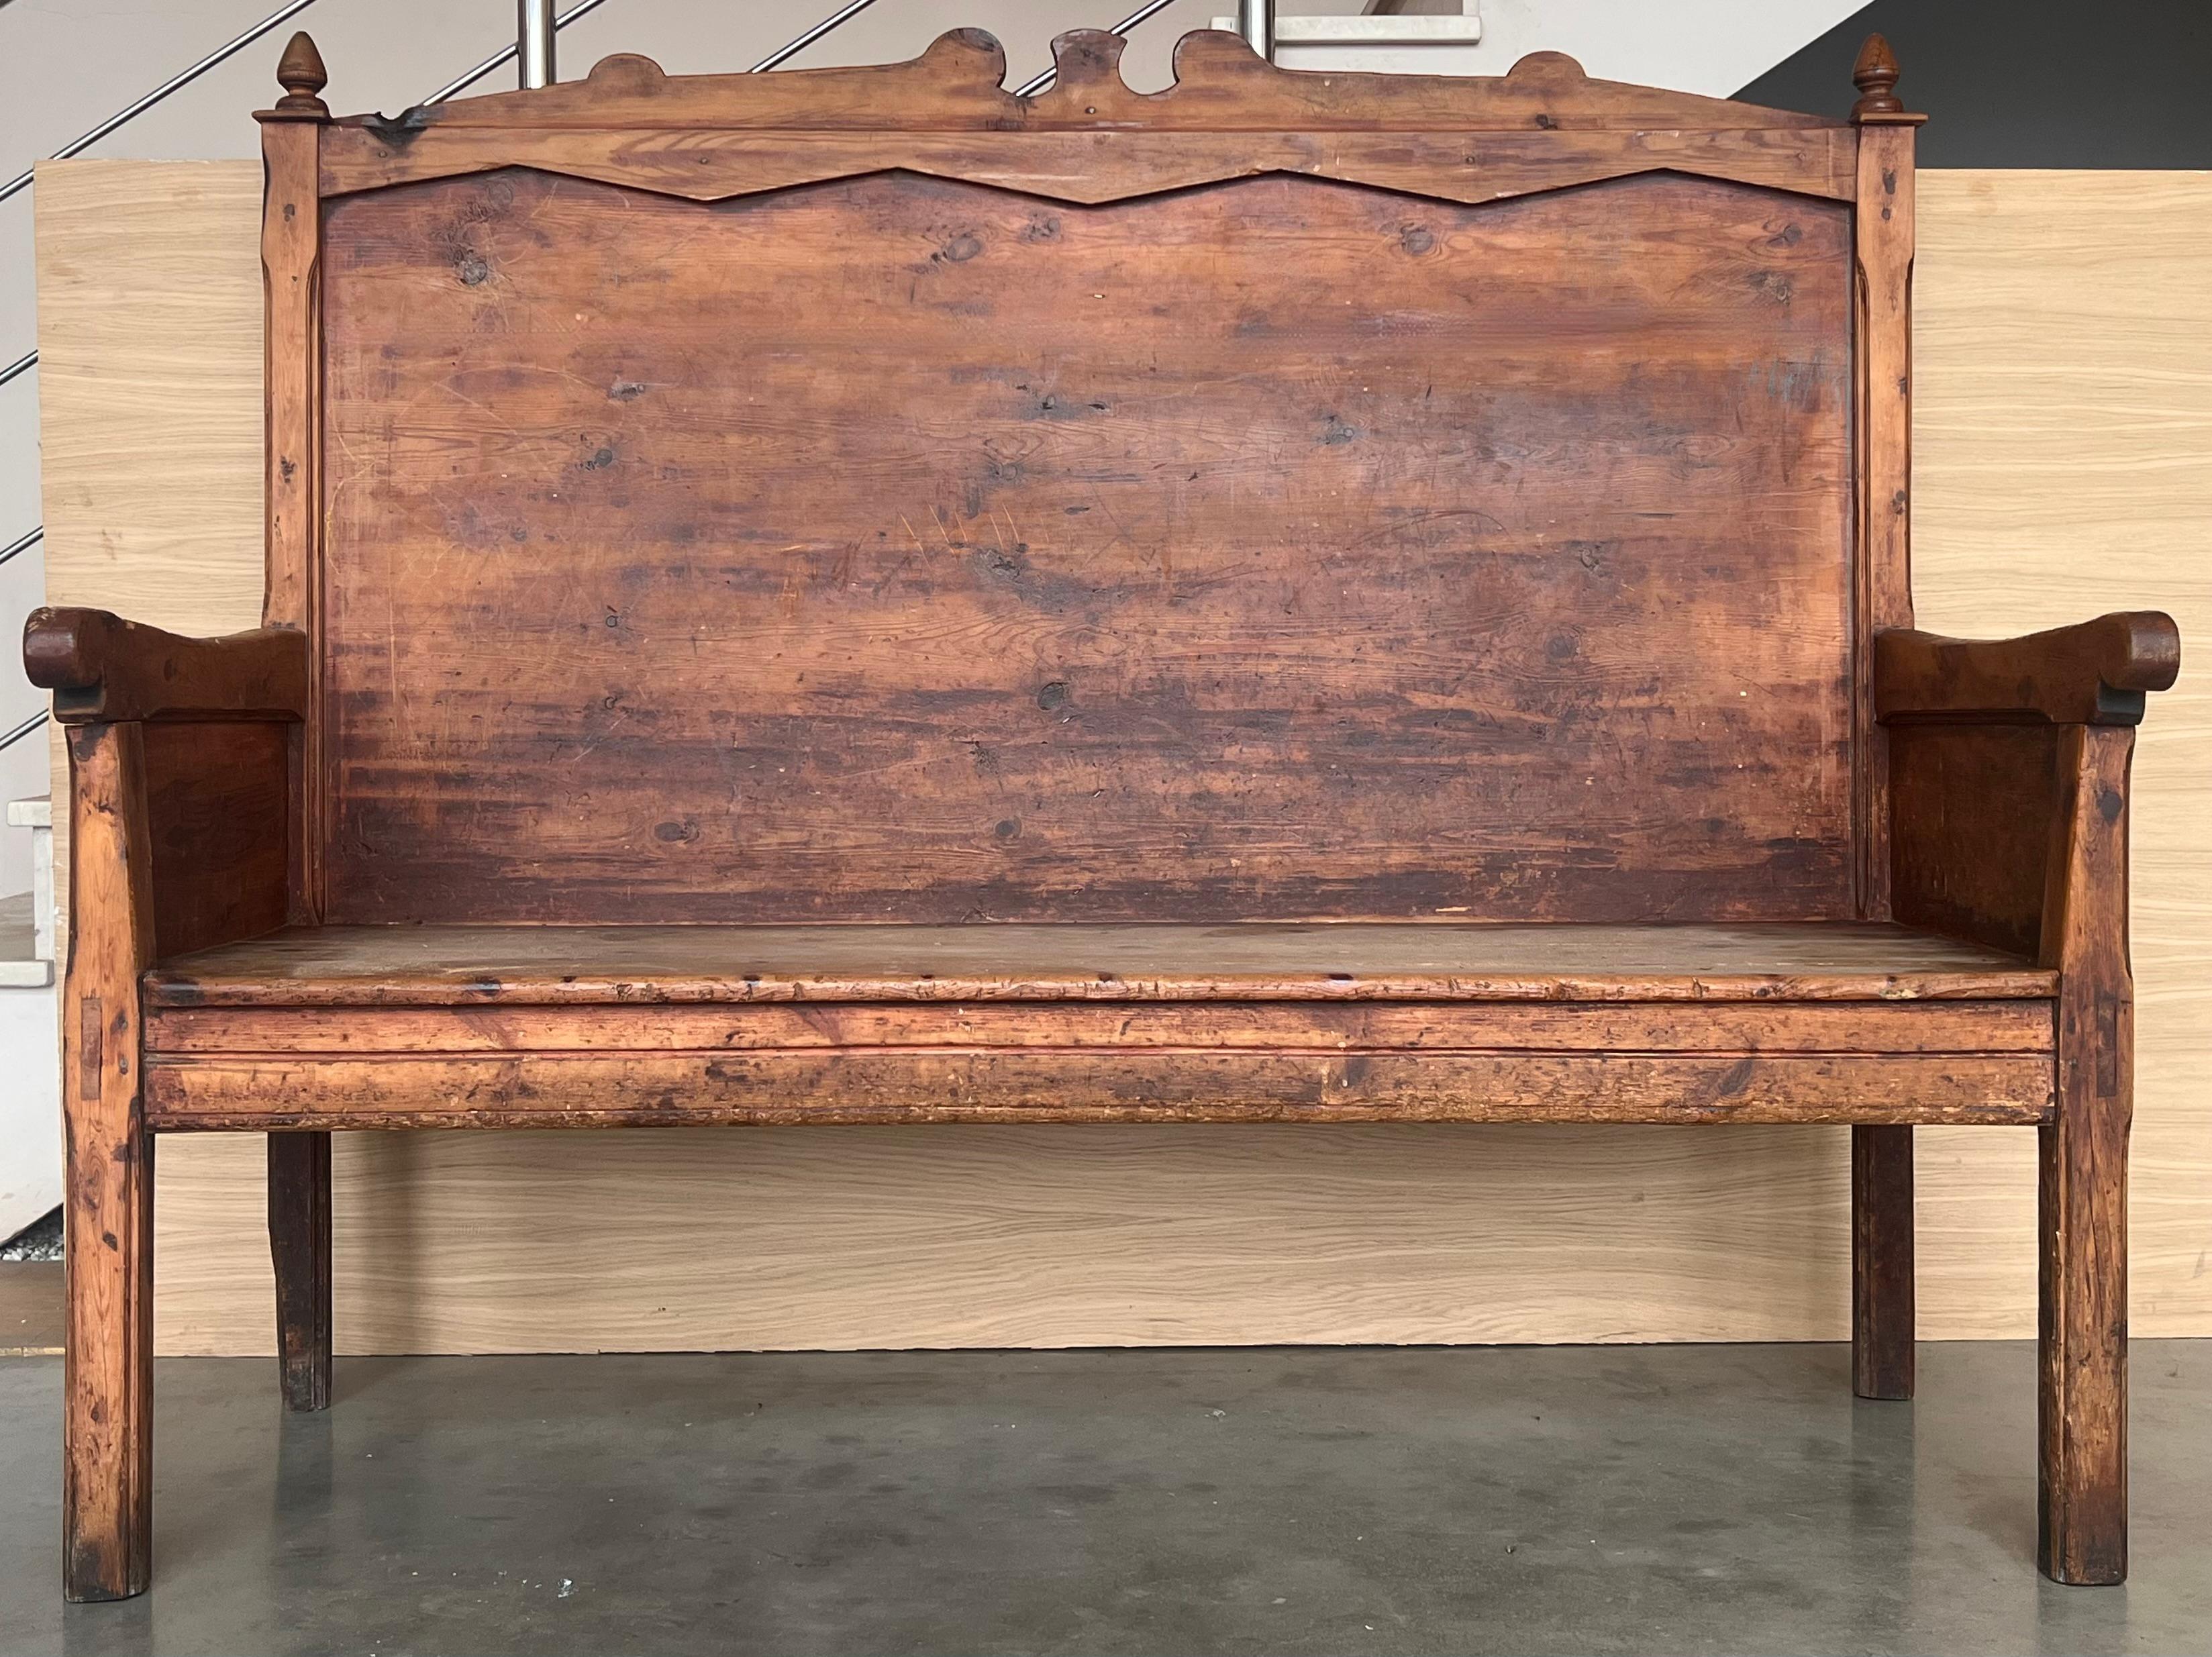 A late 19th century primitive settle bench handcrafted in the Catalan region of Spain of mélèze, a hard pine grown in mountainous regions, circa 1850s. Having a carved scalloped wing back and scalloped apron, this handsome Spanish bench features